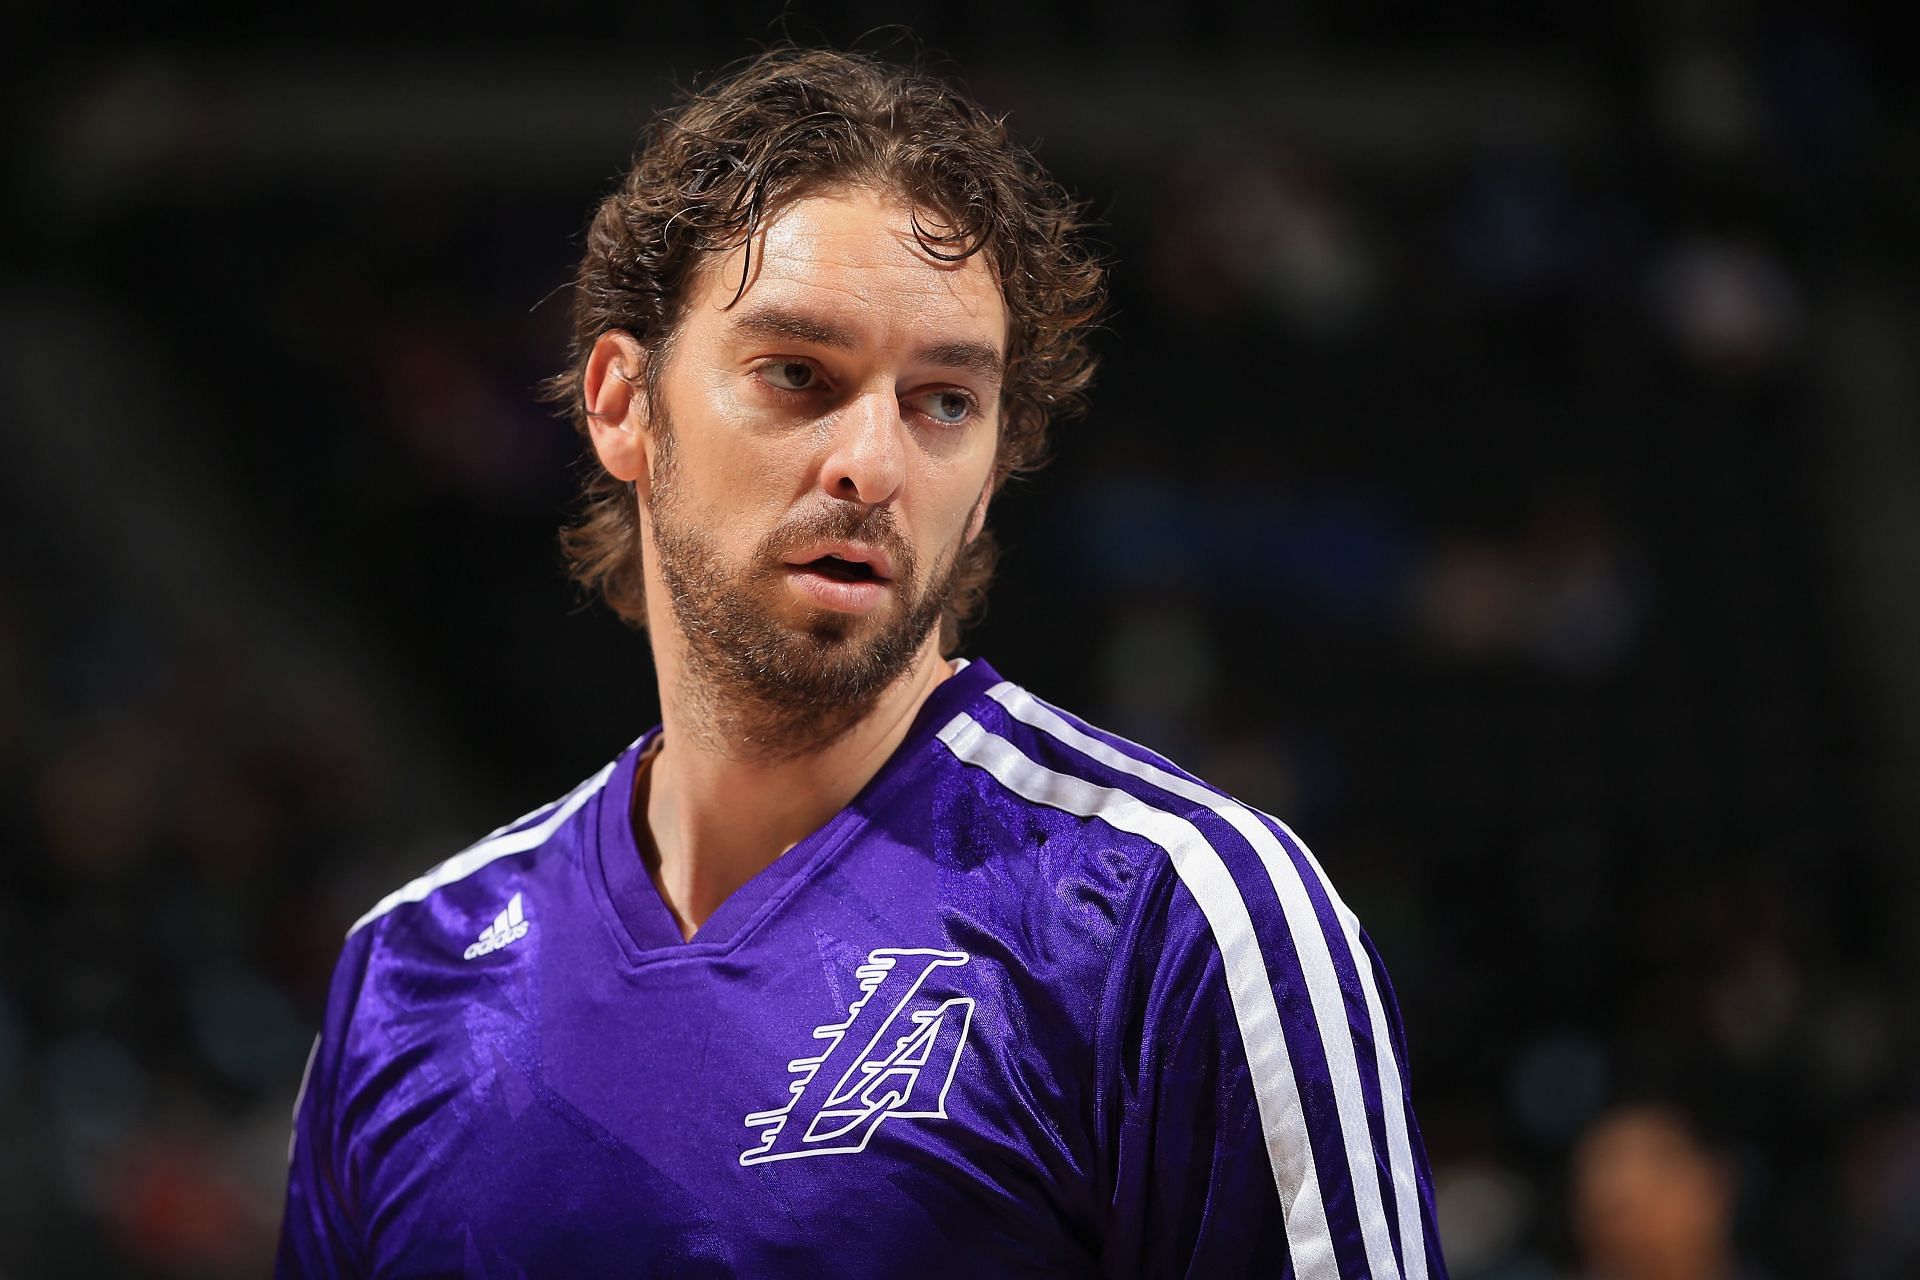 NBA - Pau Gasol: What other foreign players have had their jerseys